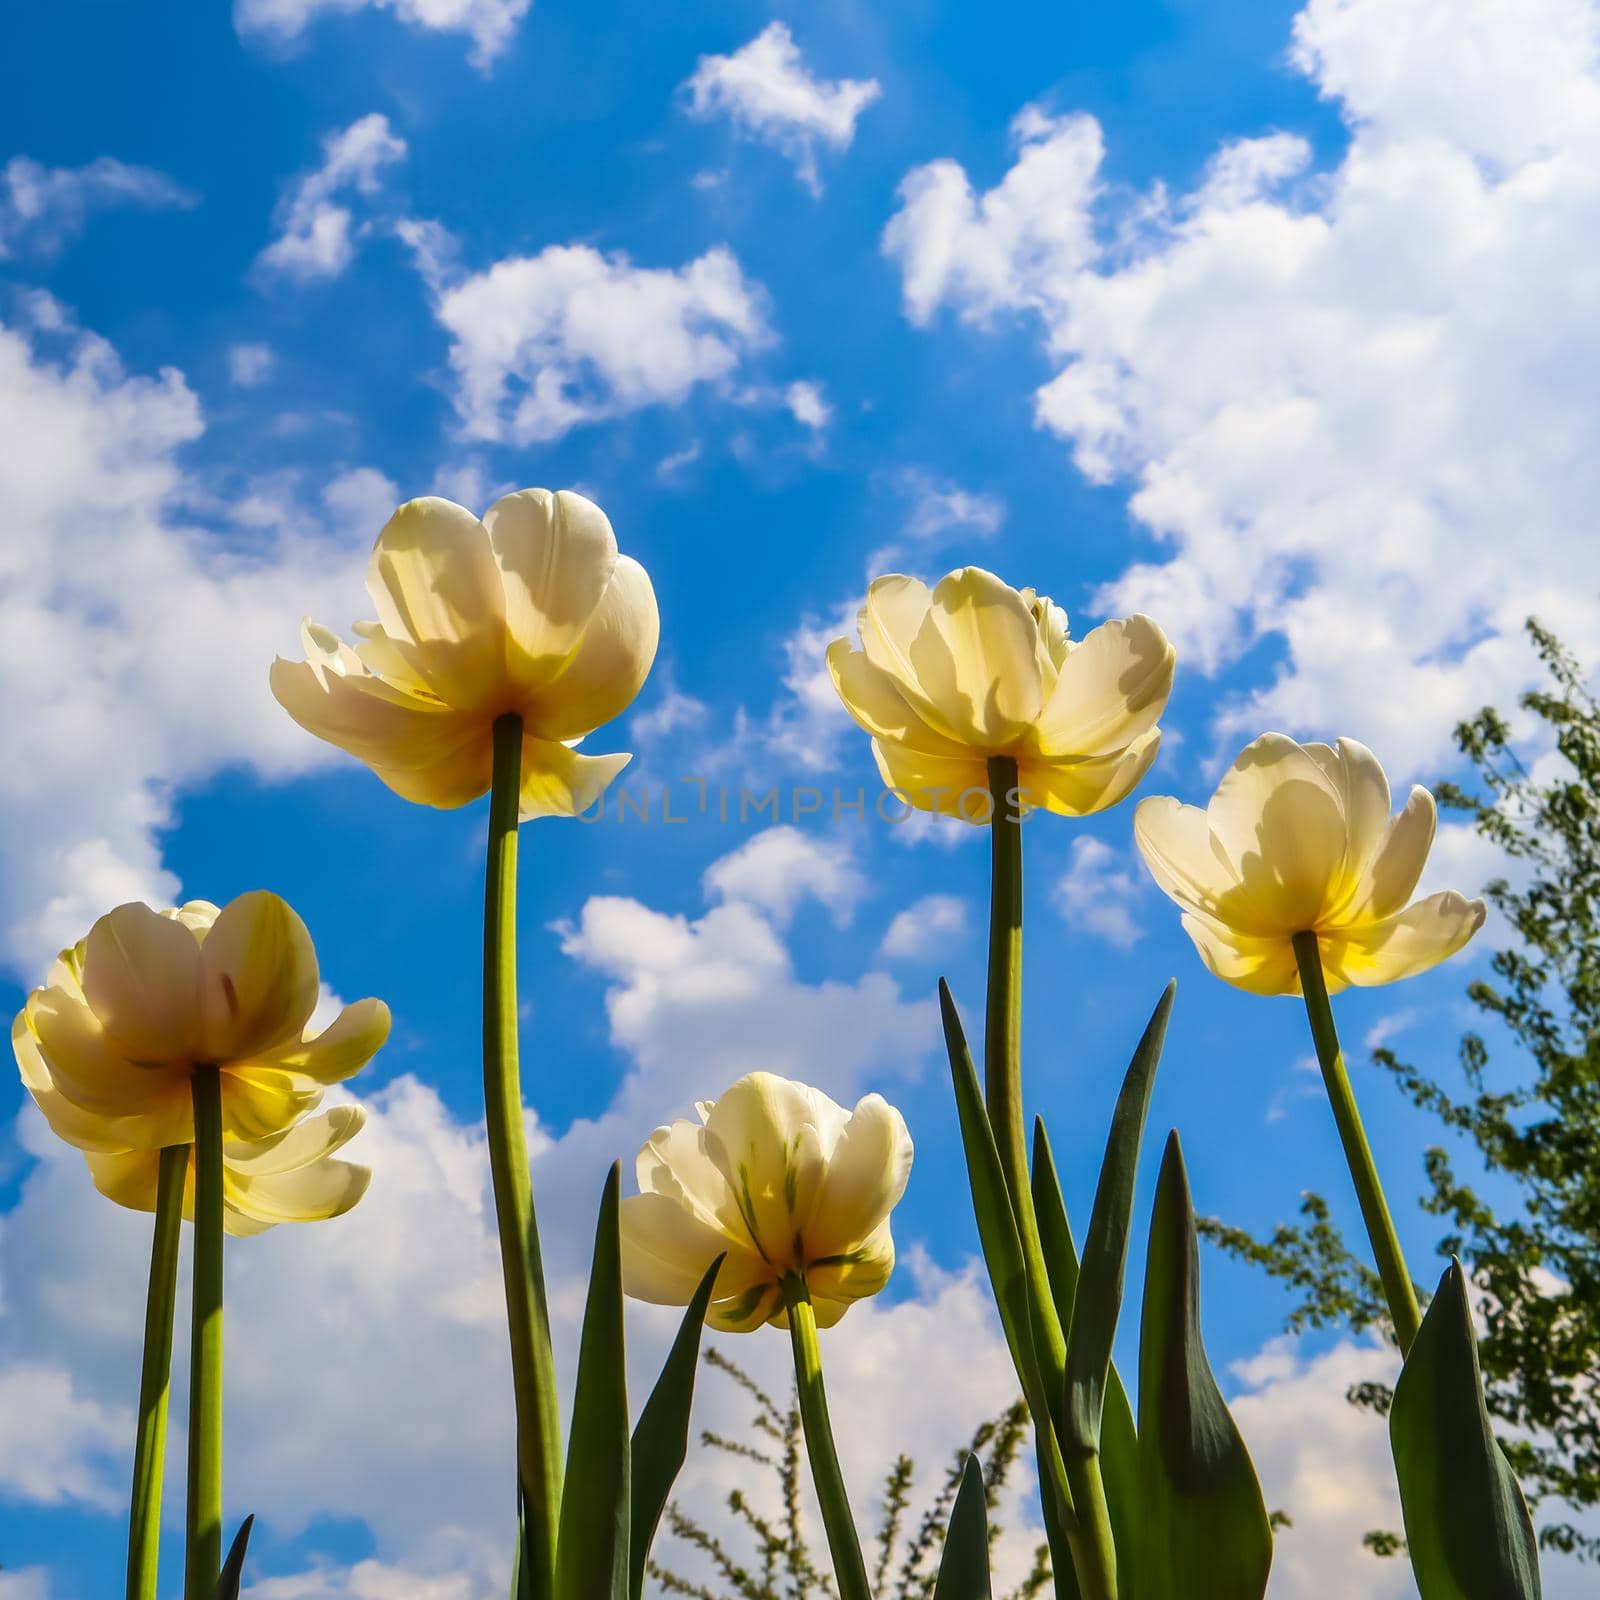 Beautiful yellow tulips on background of blue sky with clouds by Olayola